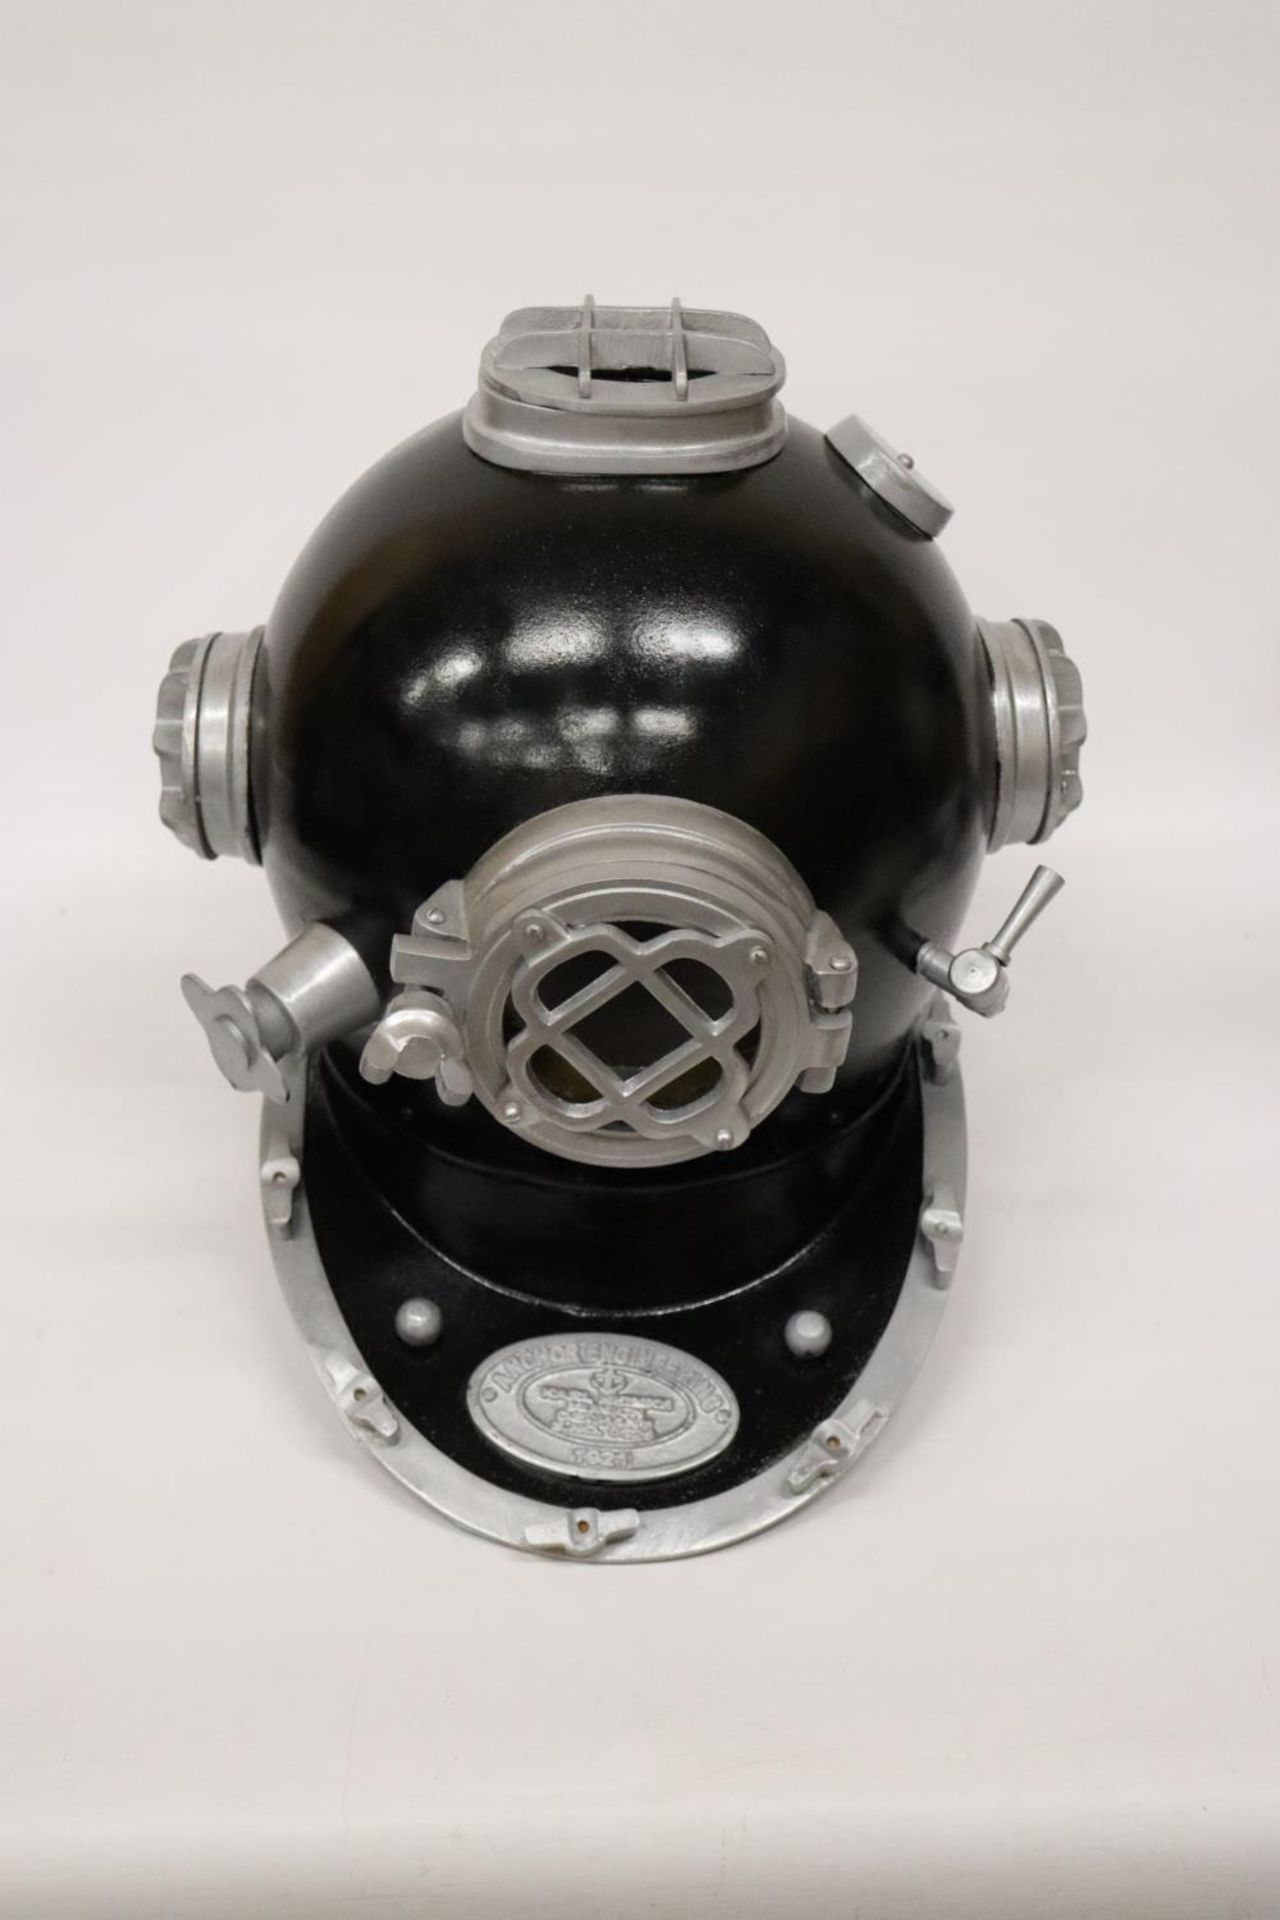 A LARGE CAST REPLICA DIVERS HELMET, HEIGHT APPROX 40CM - Image 2 of 6